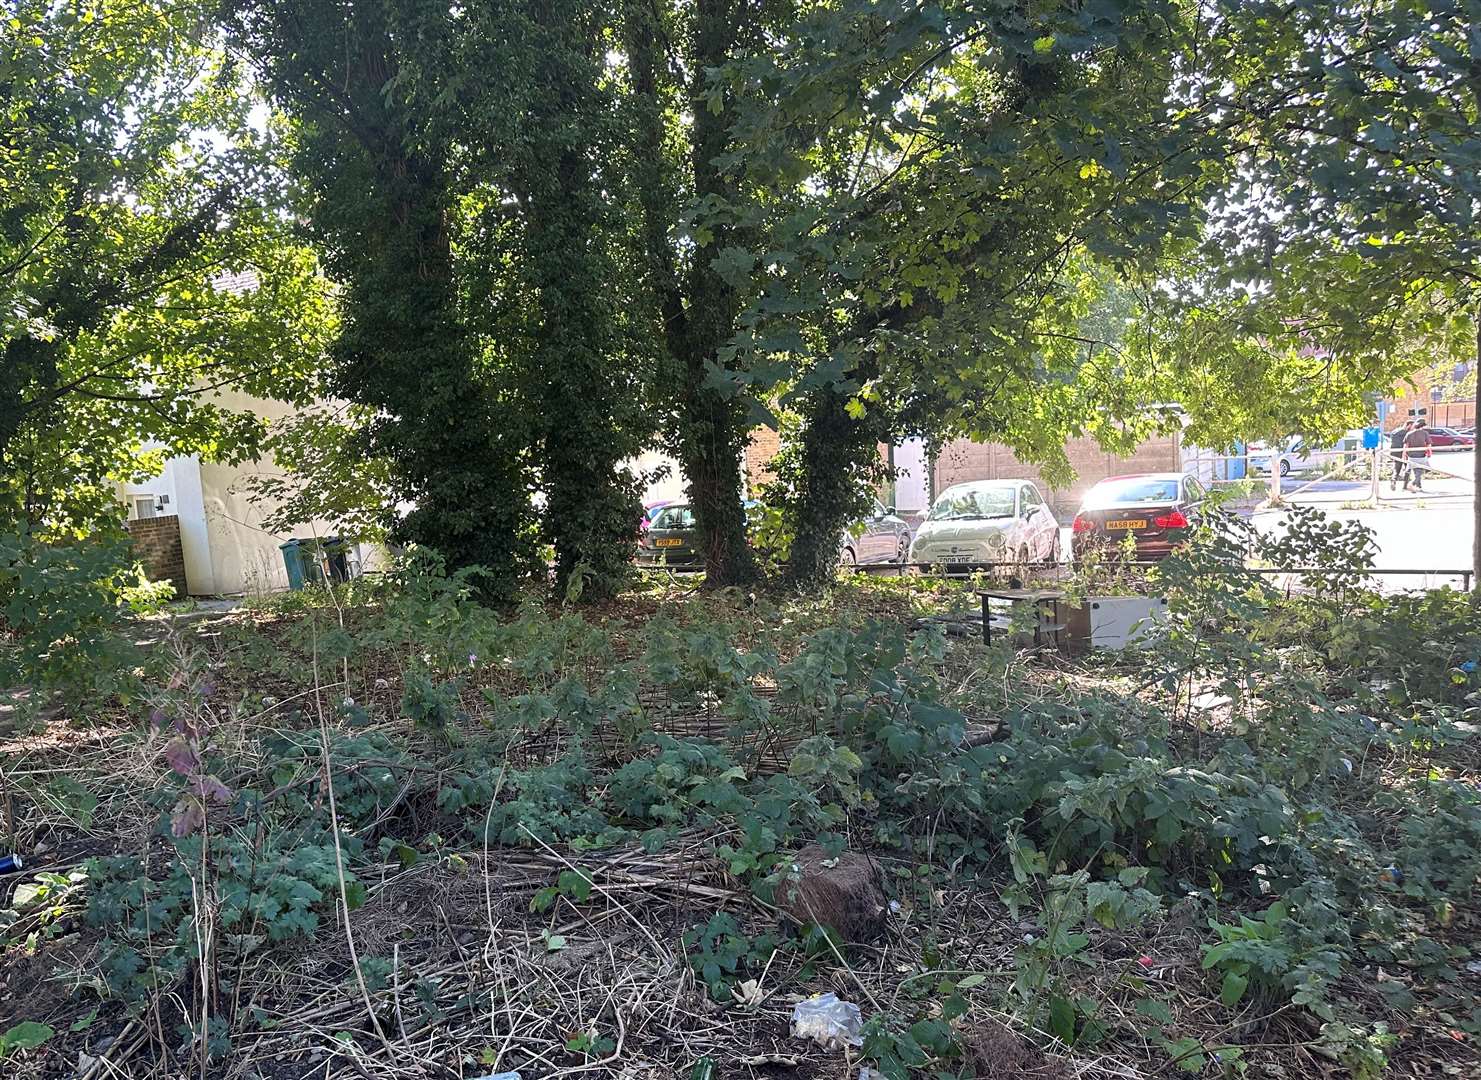 The disused scrap of land off Woollett Street could become a community garden